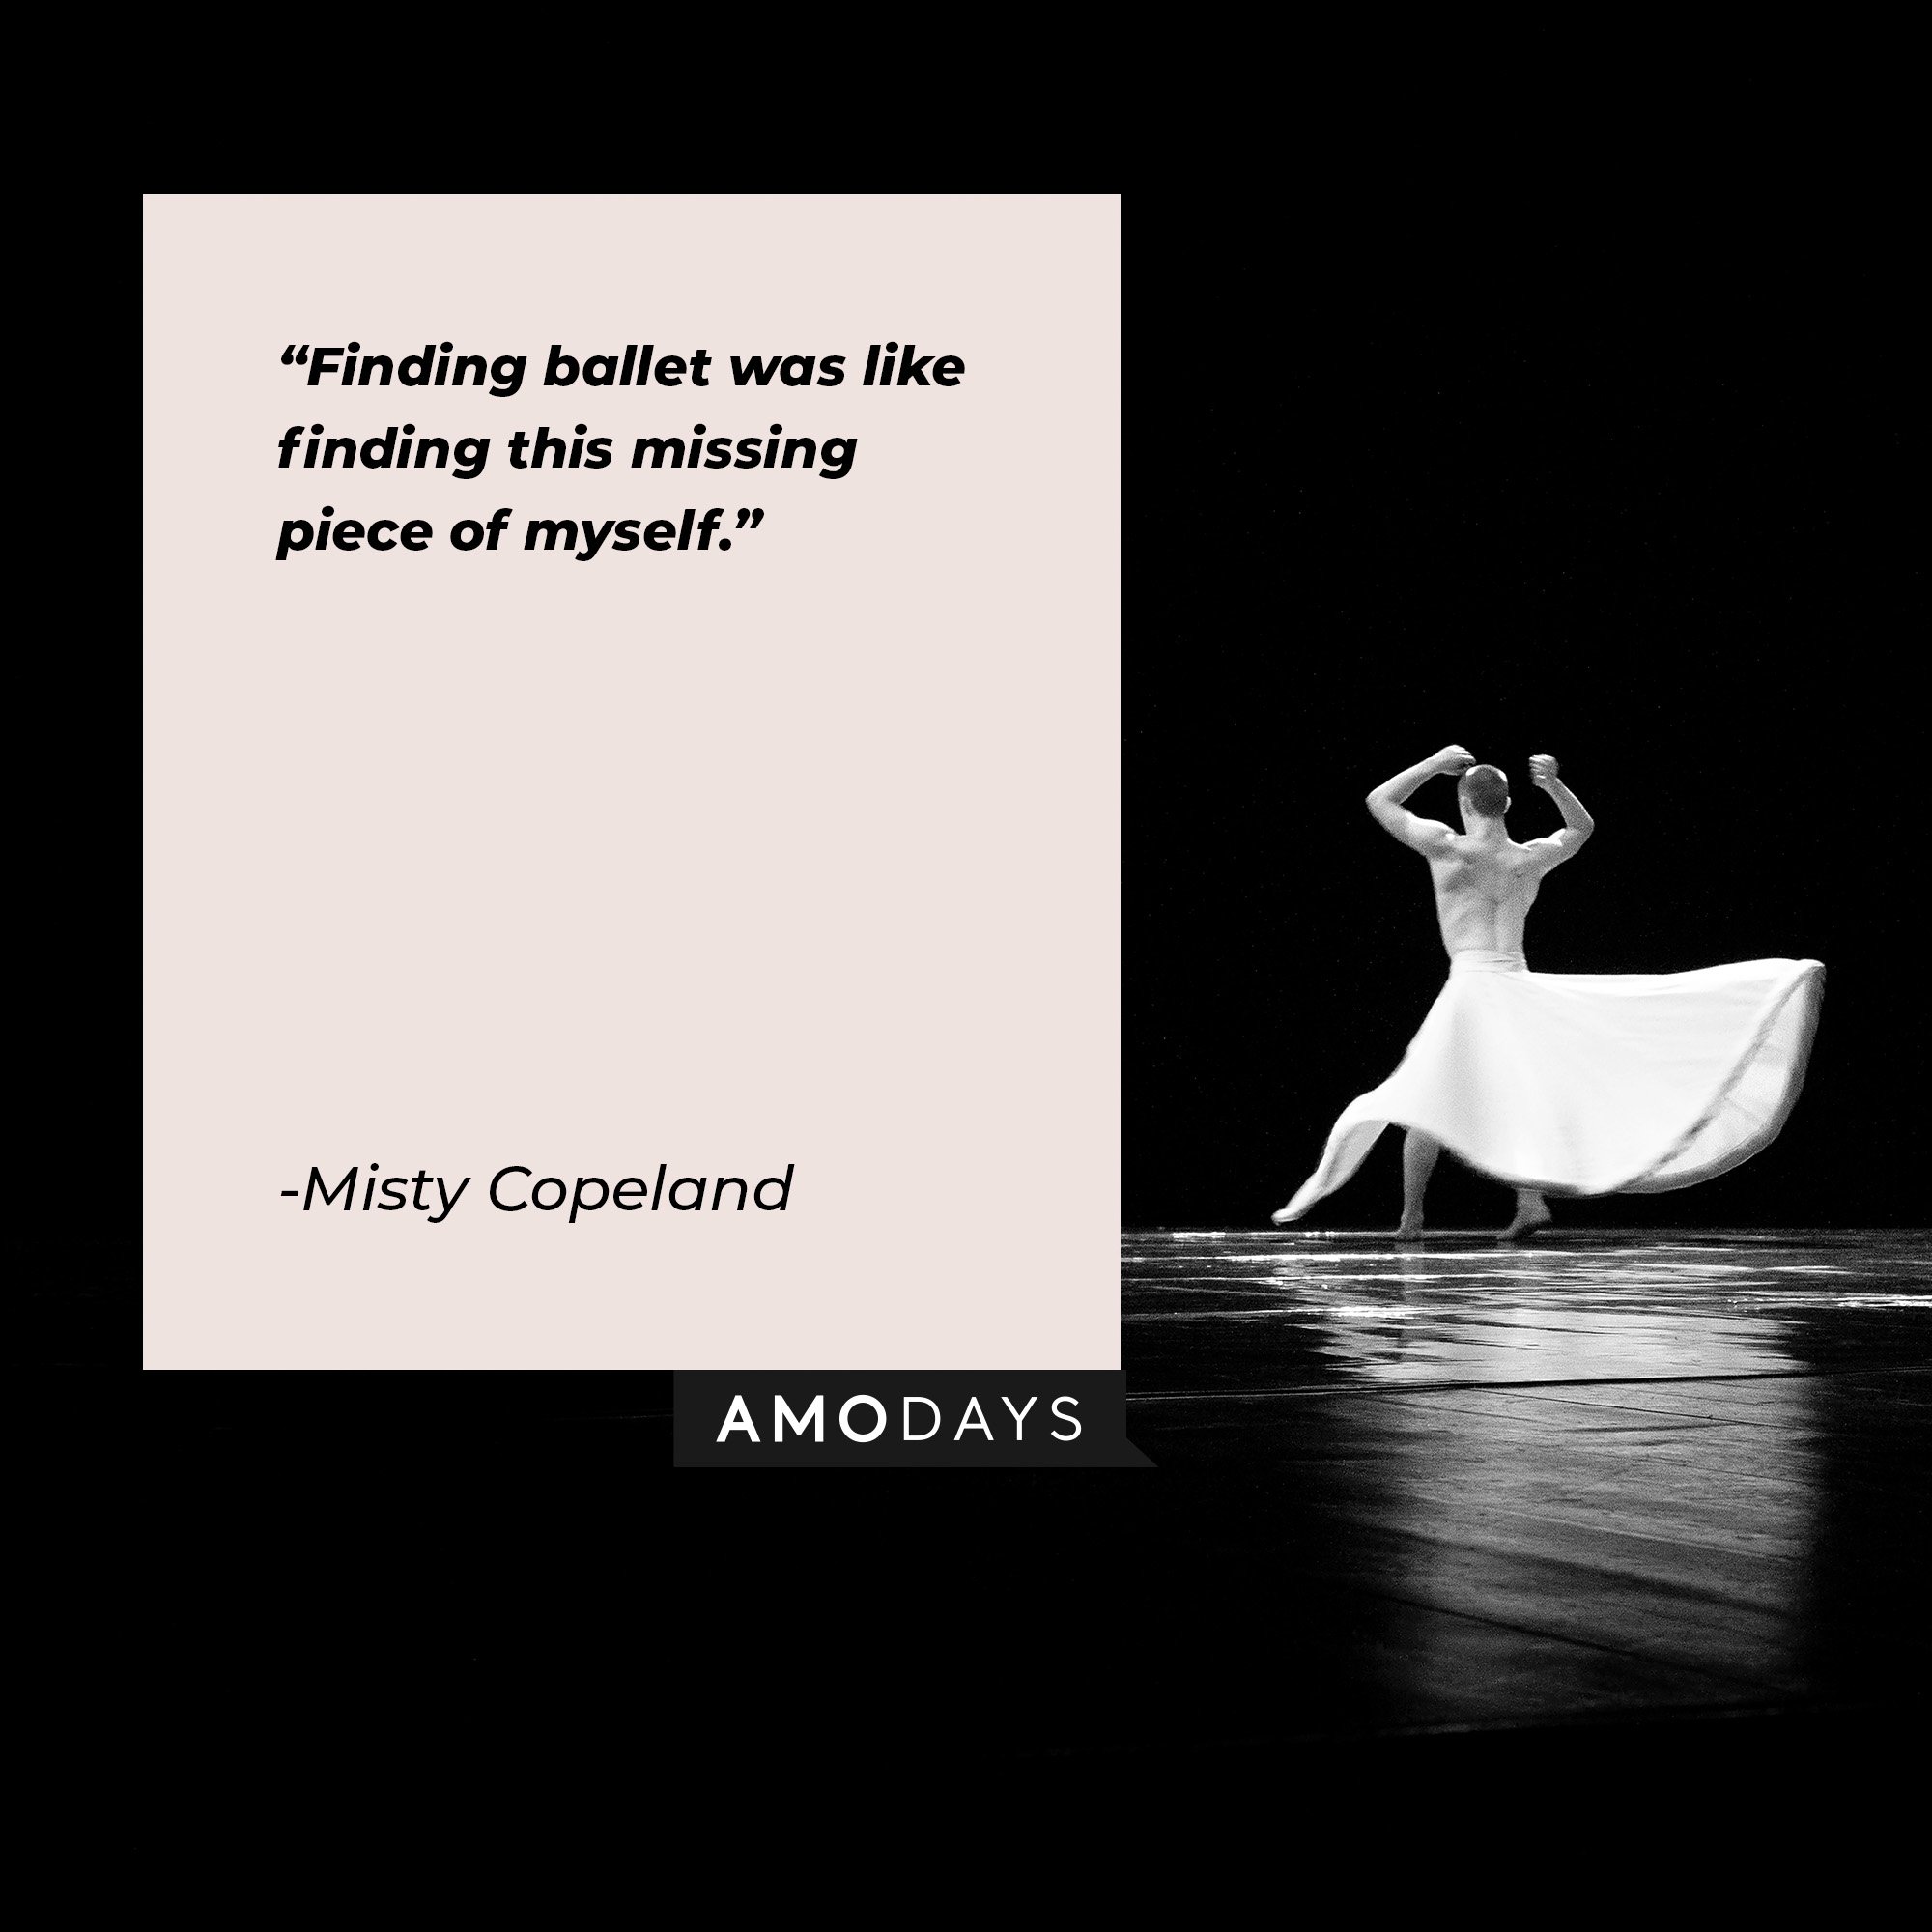  Misty Copeland’s quote: "Finding ballet was like finding this missing piece of myself." | Image: AmoDay